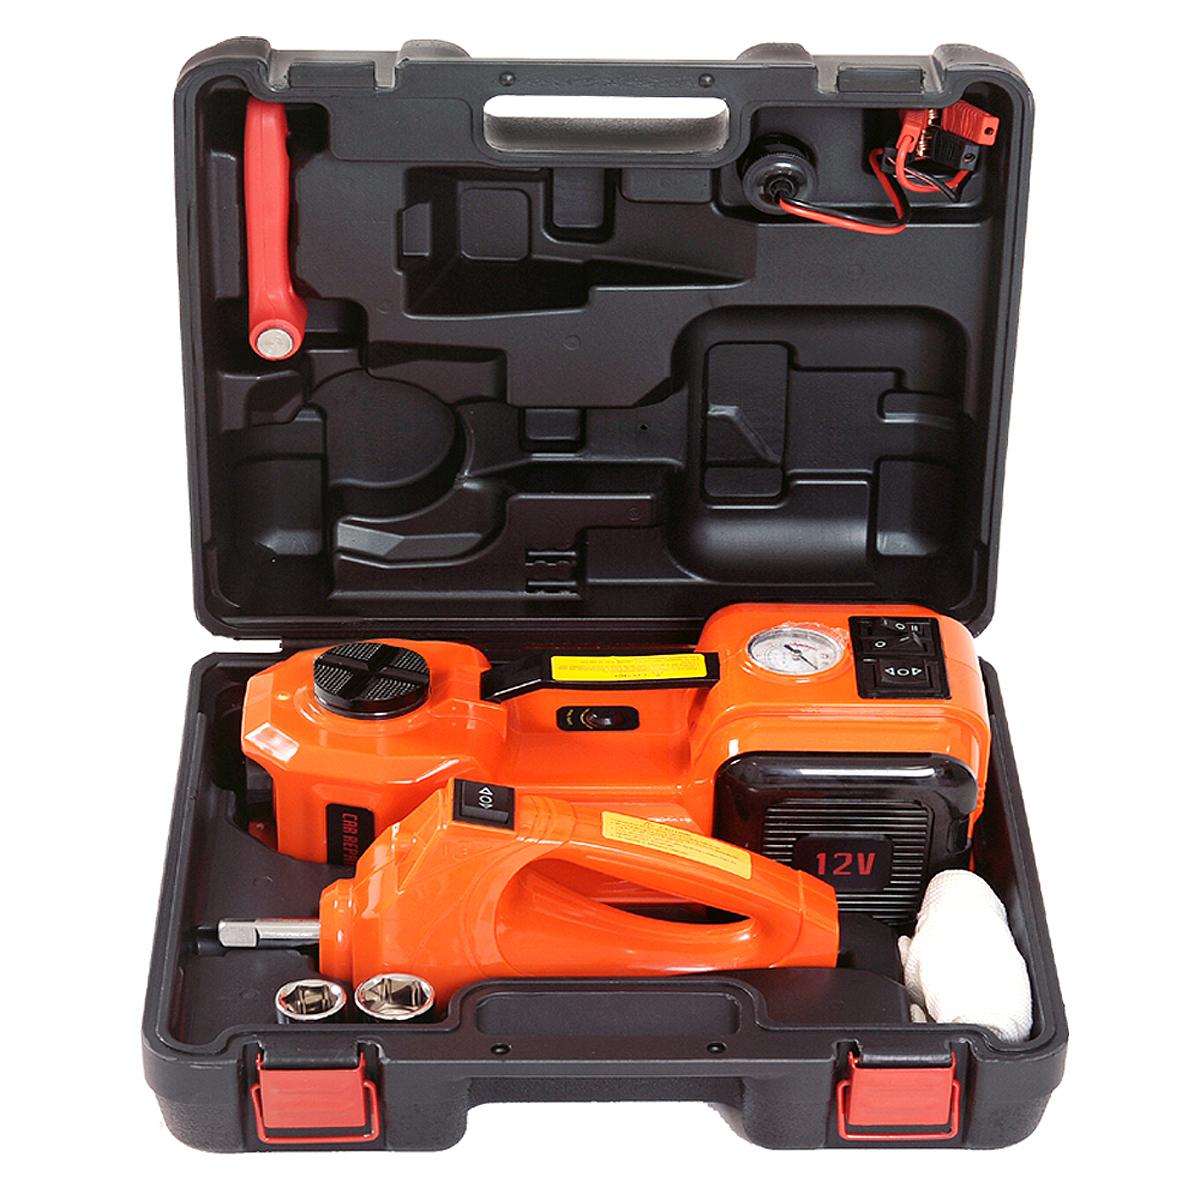 12V DC 5T 3-in-1 Auto Car Electric Hydraulic Floor Jack Lift And Impact Wrench